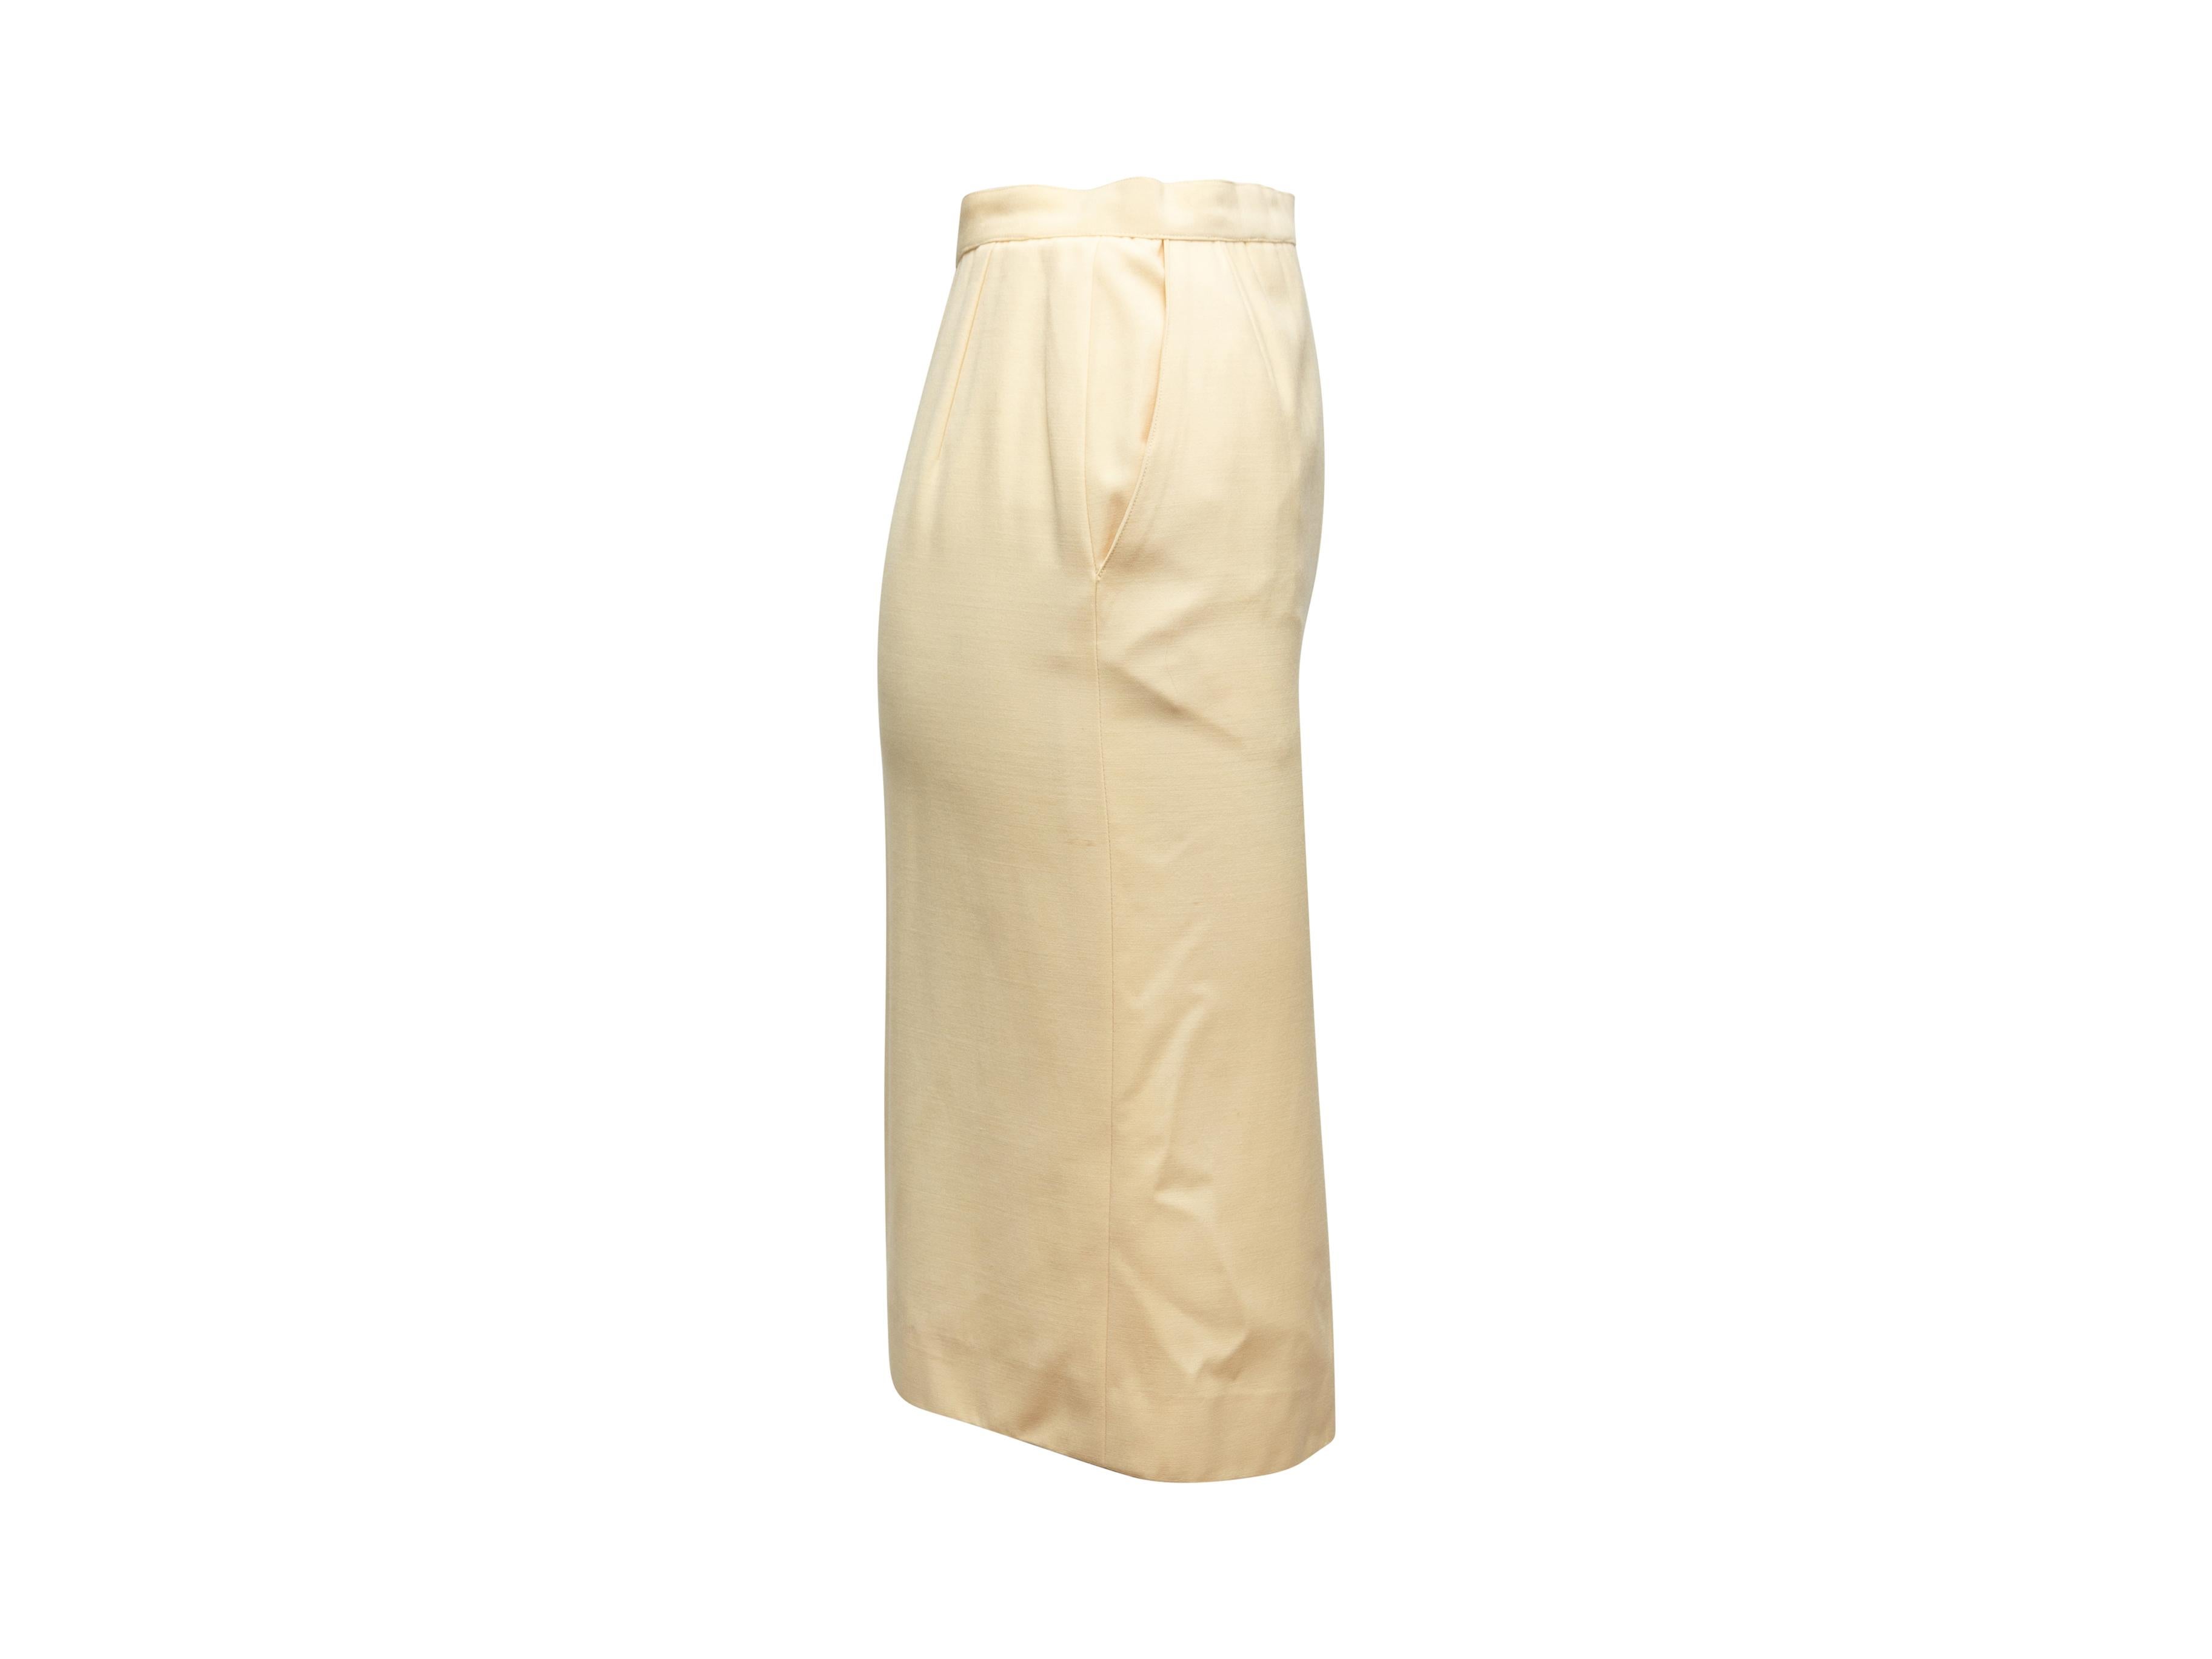 Product details: Cream wool knee-length pencil skirt by Chanel. Vent at front center hem. Dual hip pockets. Zip and CC button closure at side. 24